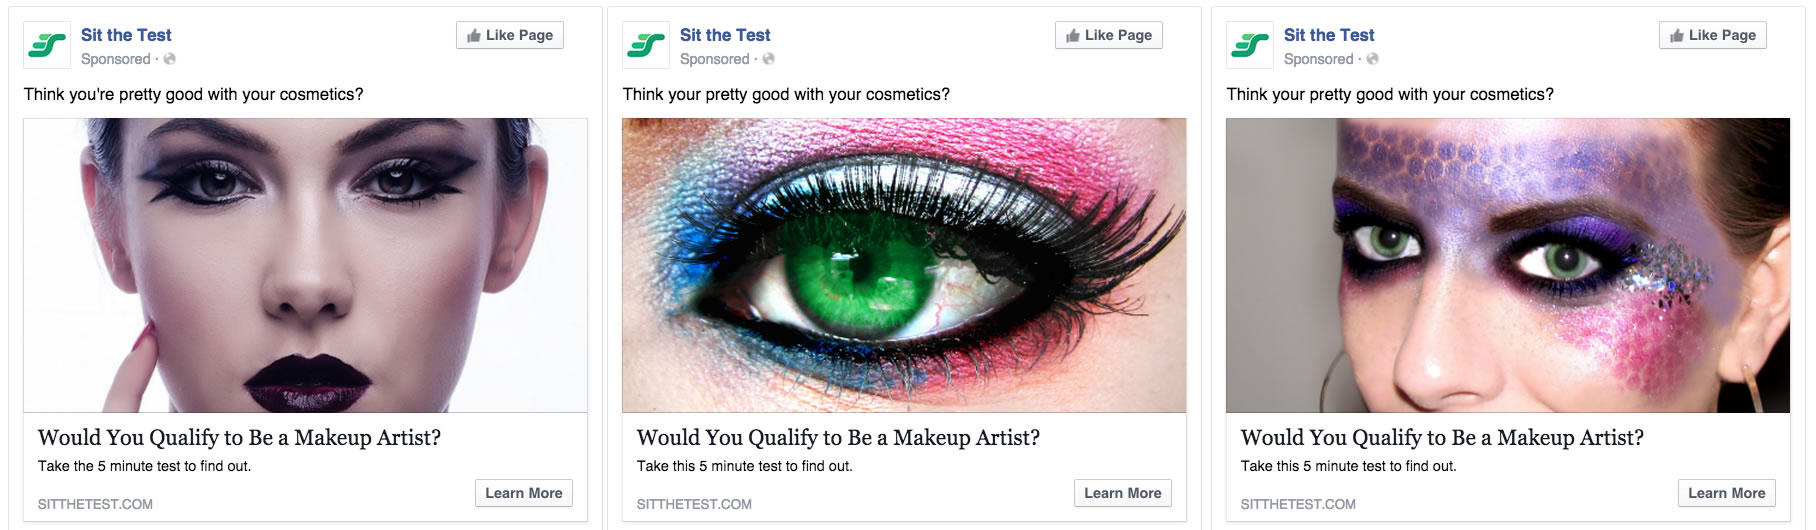 3-facebook-ads How to Use Quizzes and Facebook to Build Your List… Fast